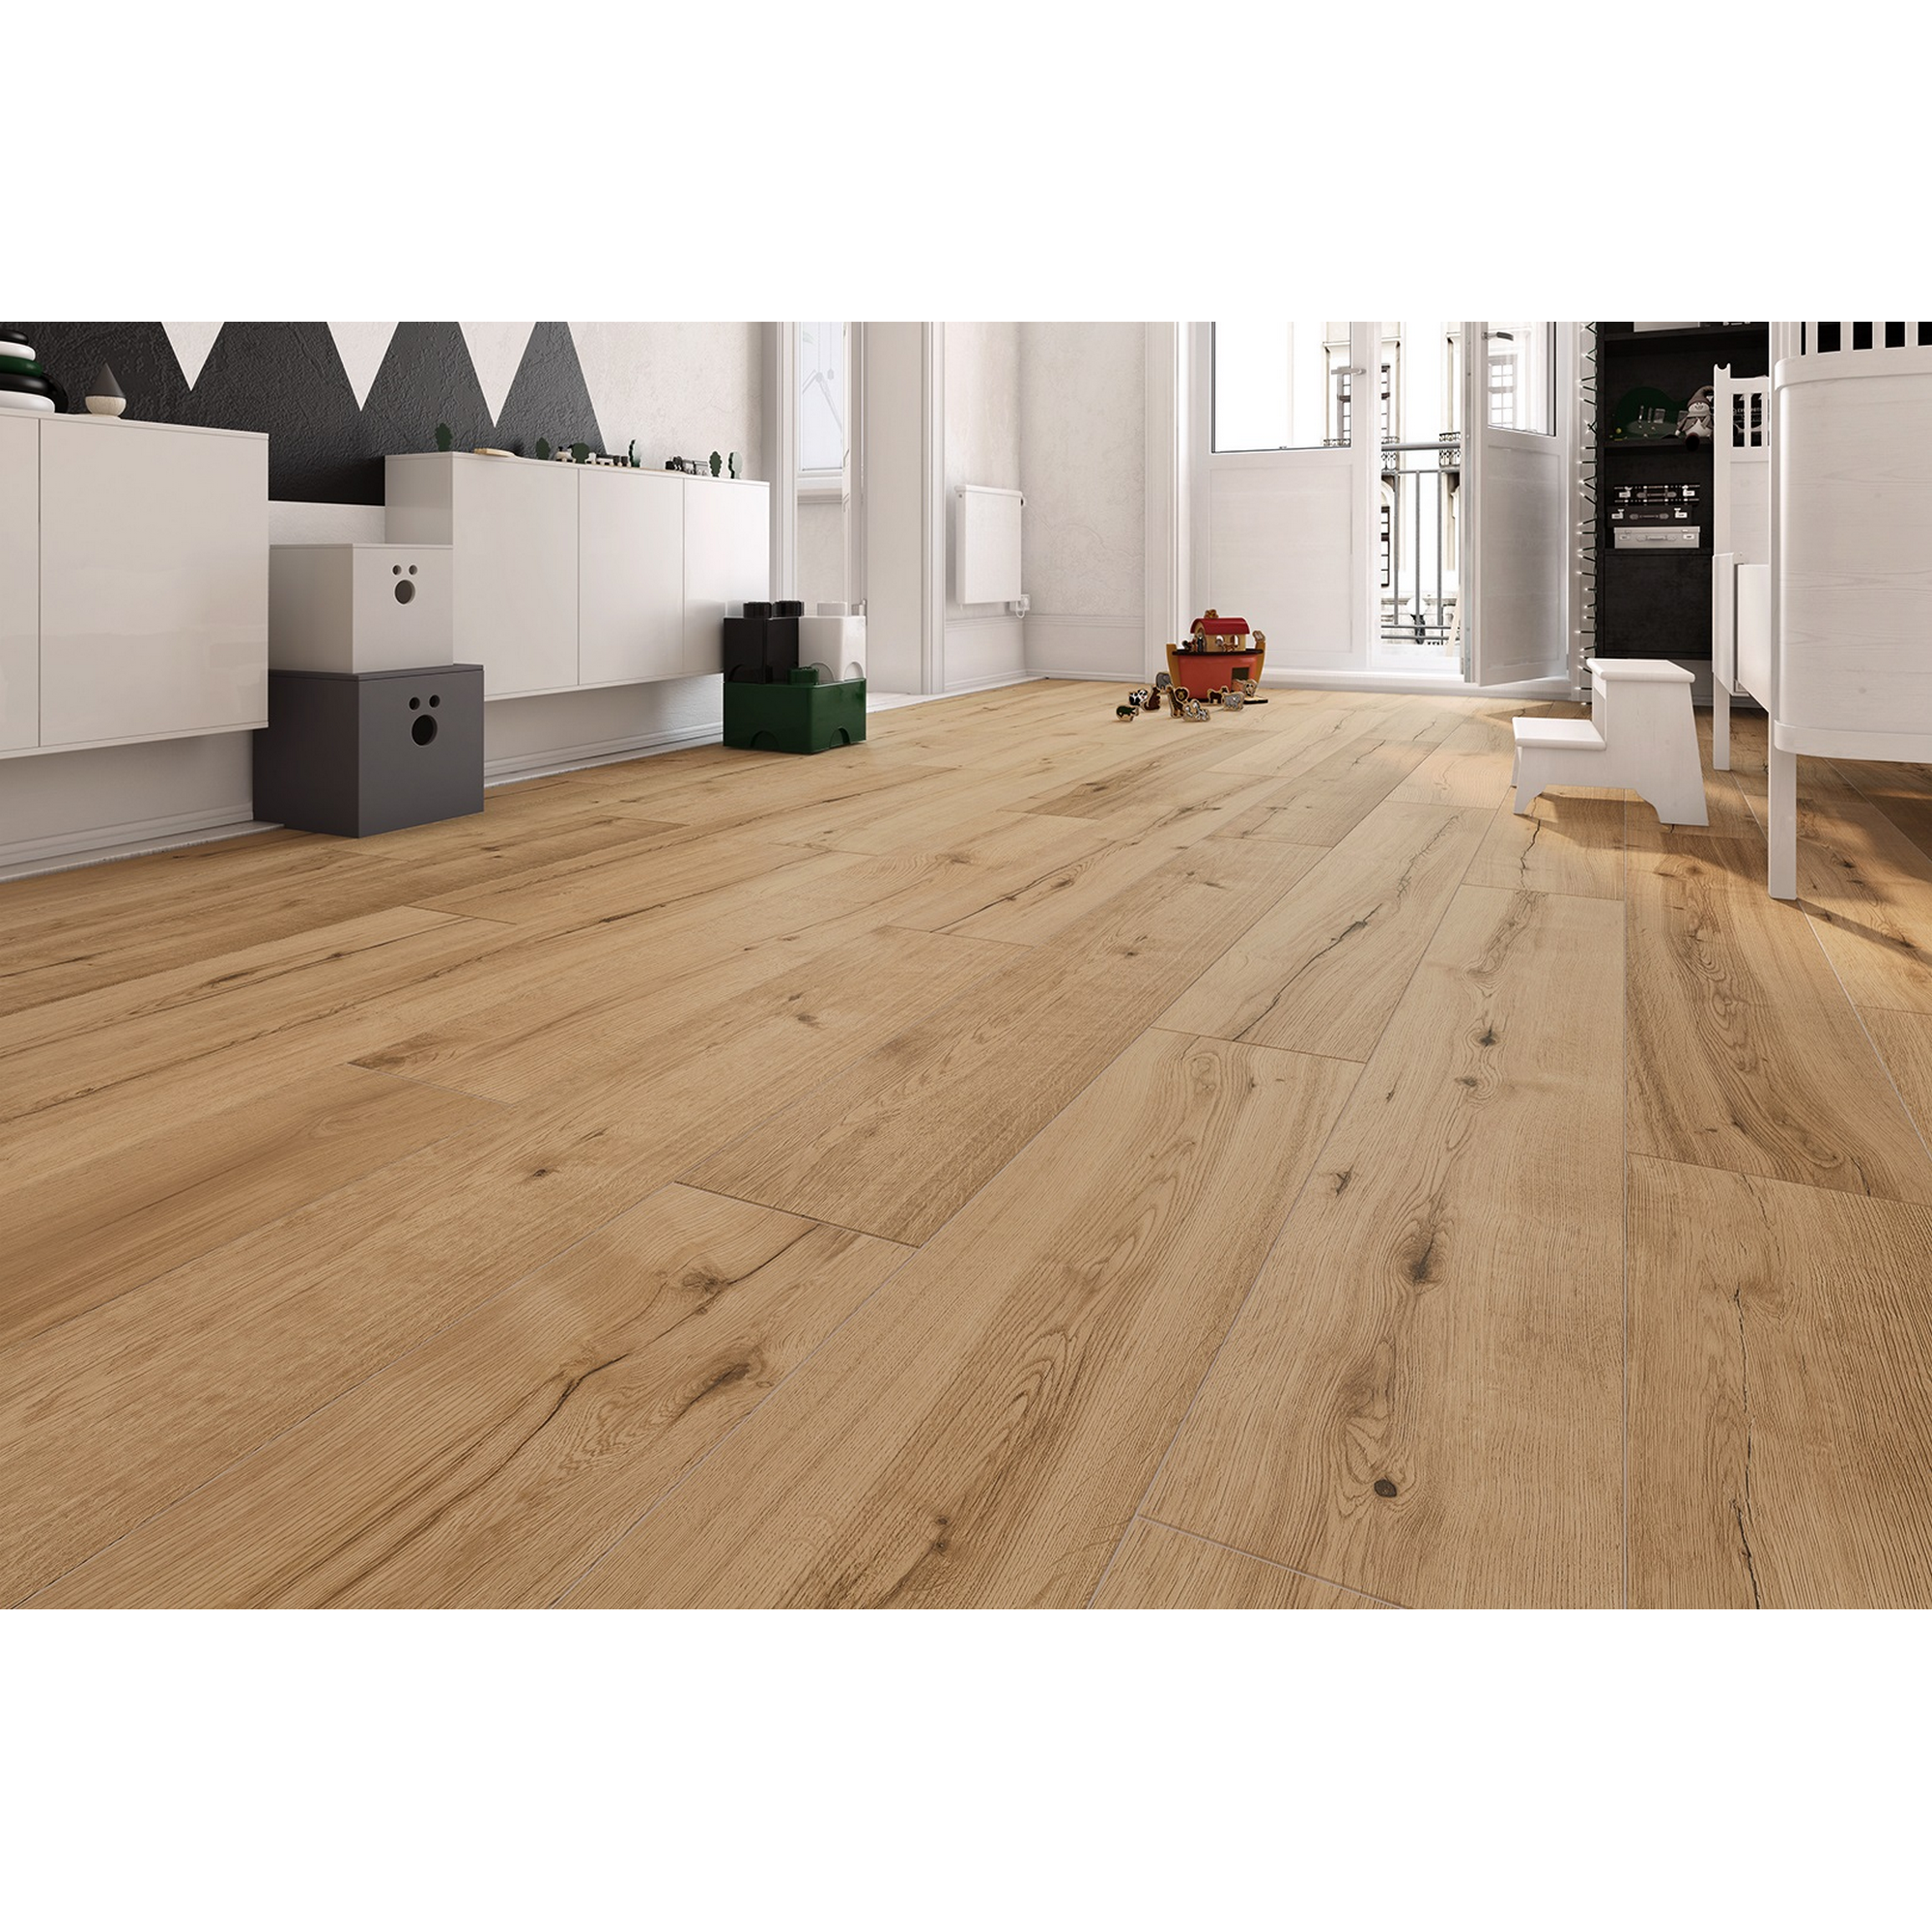 Laminat '832-4 WR Woodside' hell wasserresistent 8 mm + product picture